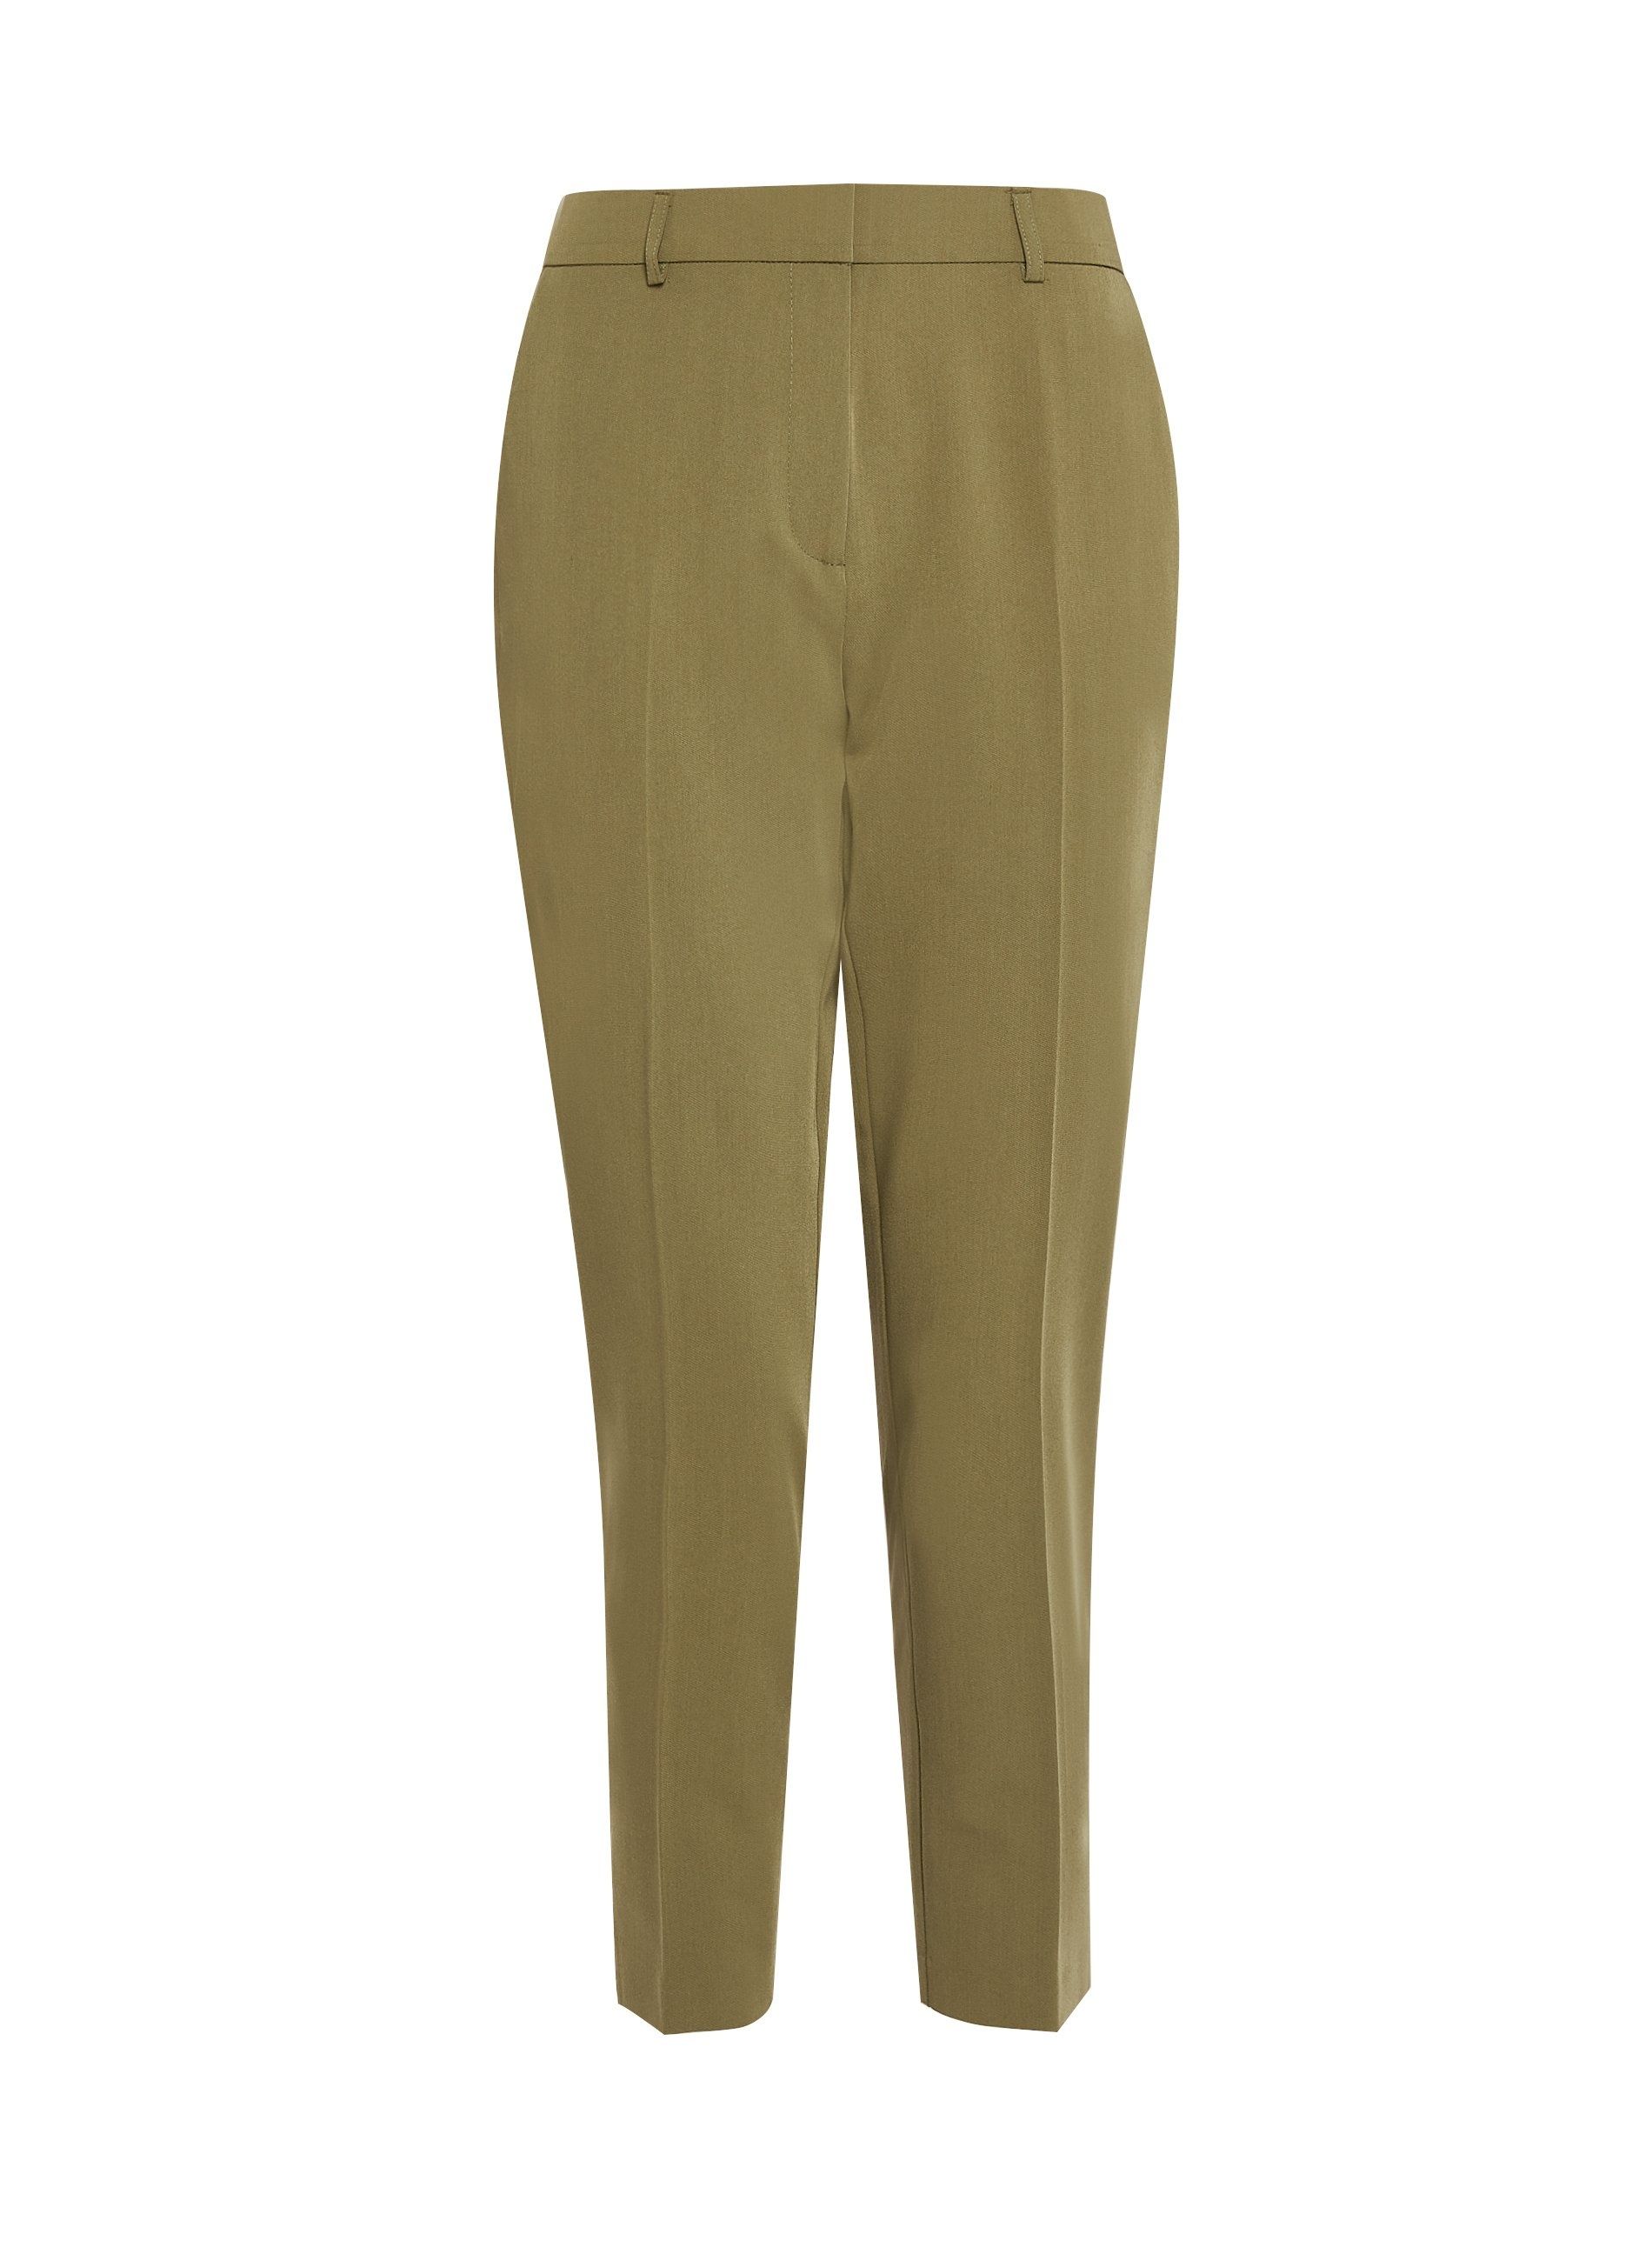 Dorothy Perkins Womens Green Ankle Grazer Tailored Trousers Pants Bottoms